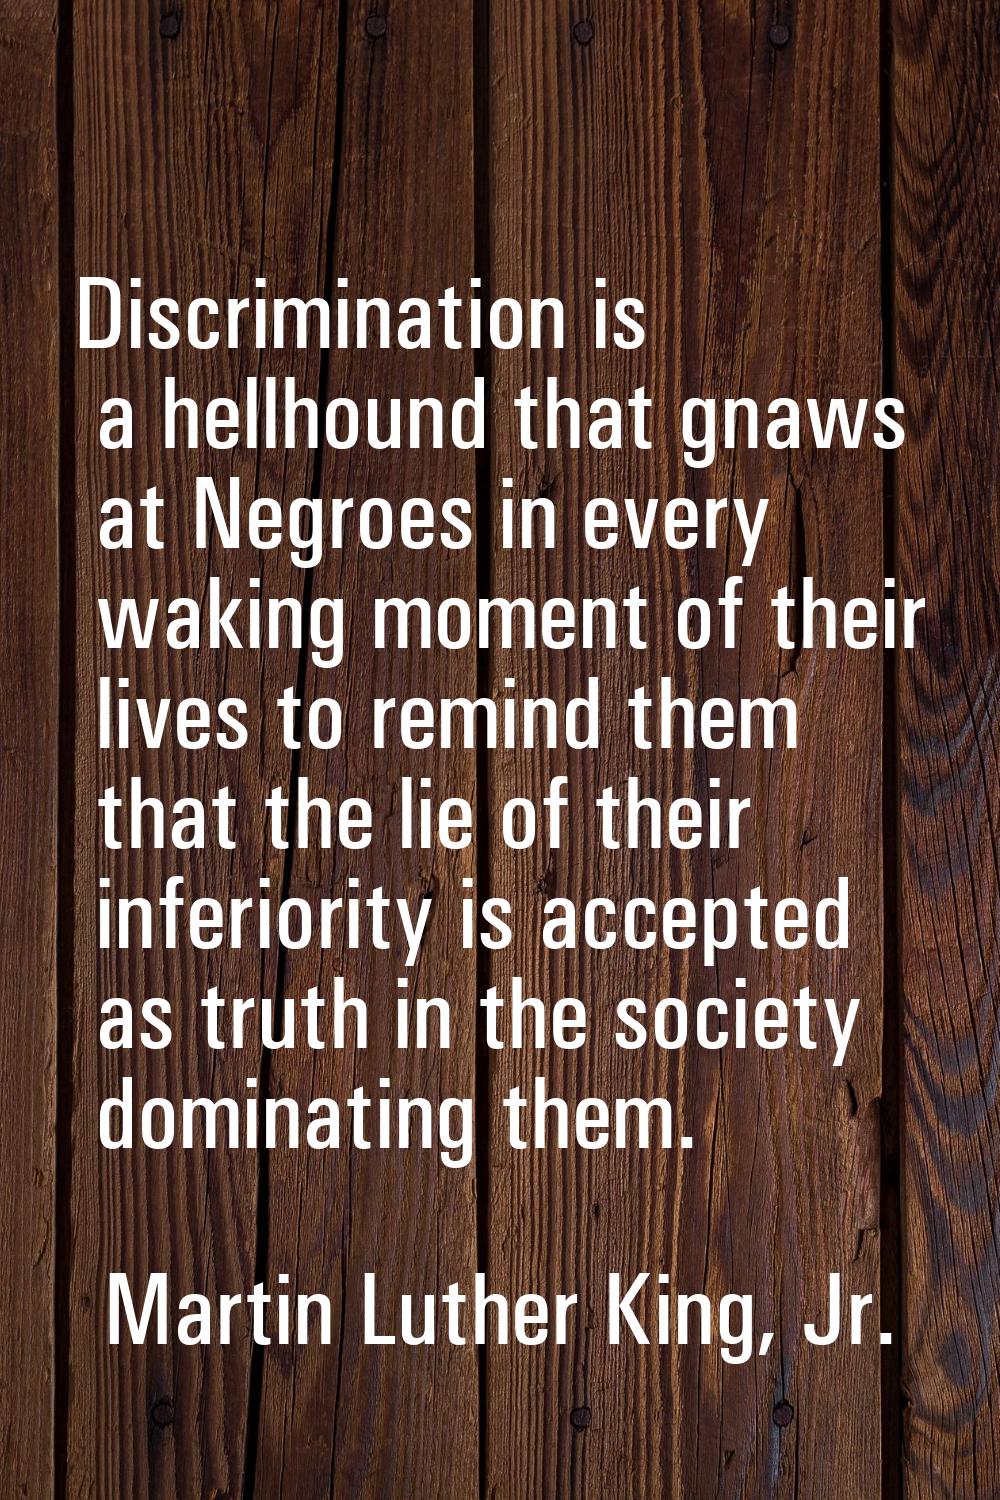 Discrimination is a hellhound that gnaws at Negroes in every waking moment of their lives to remind